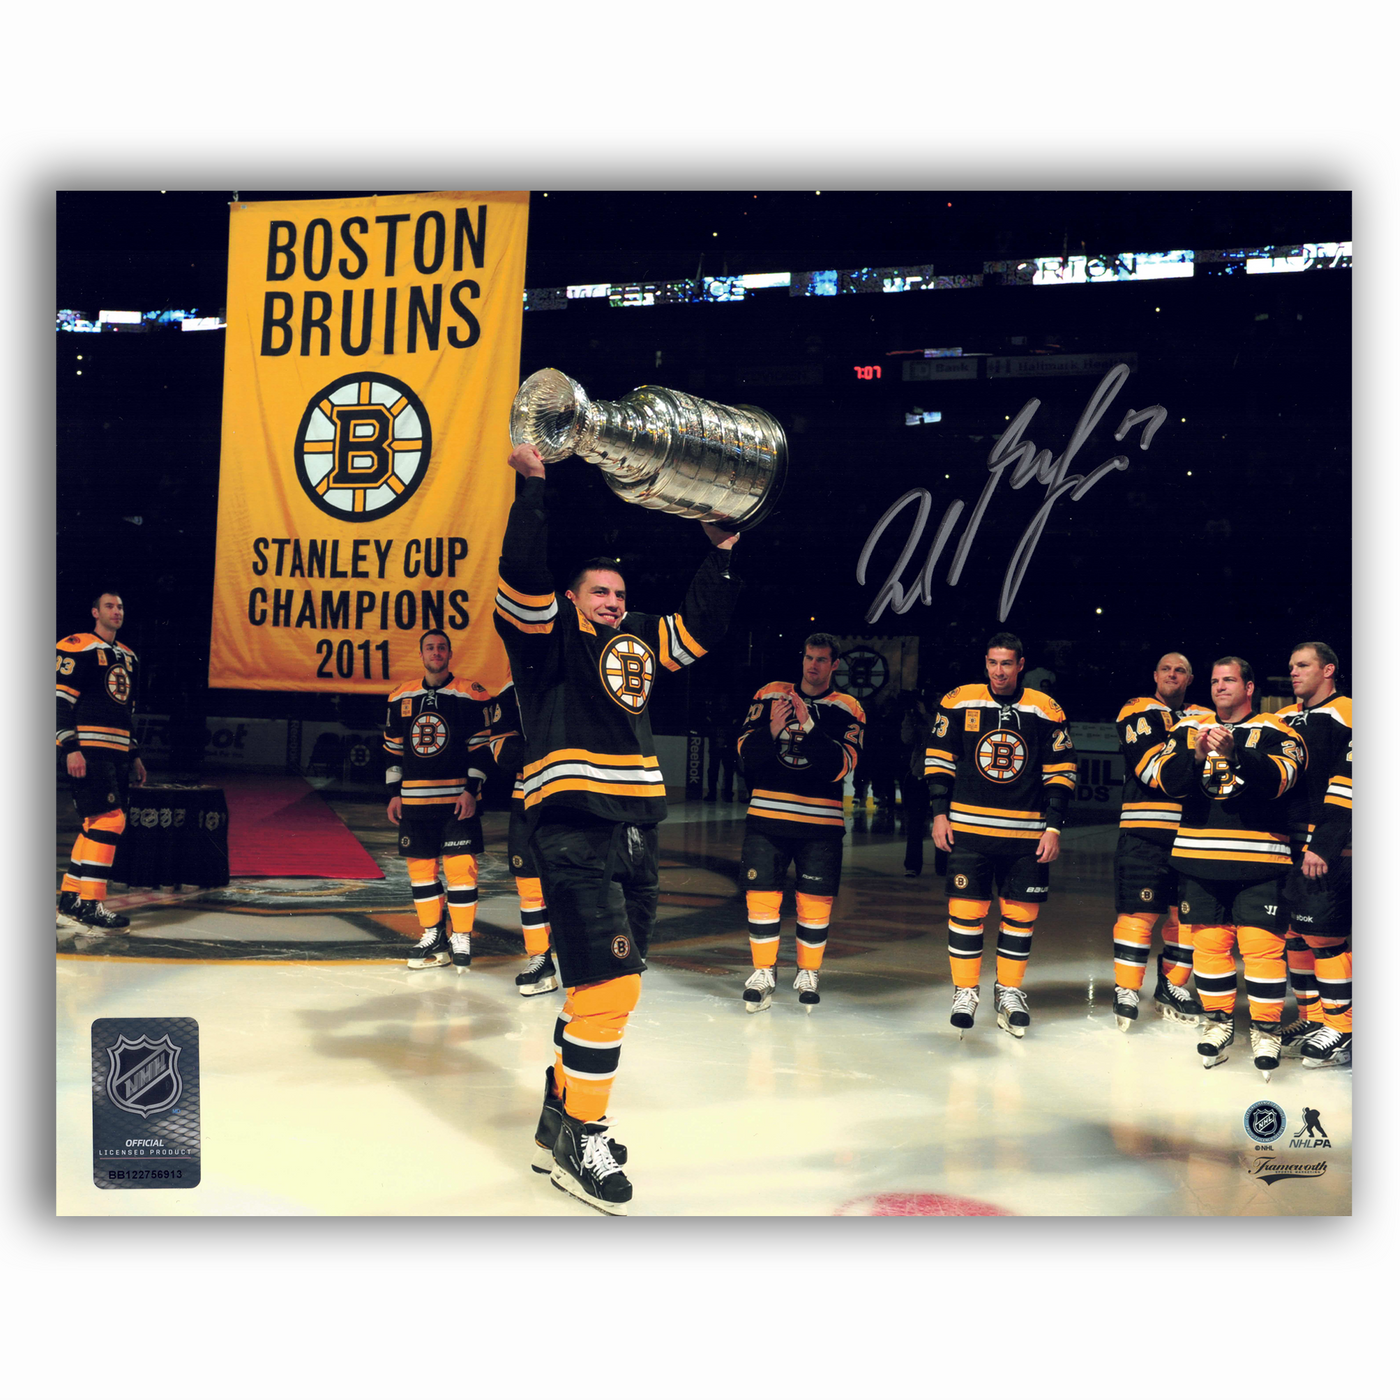 Milan Lucic Boston Bruins 2011 Stanley Cup Champion Autographed 8x10 Photo